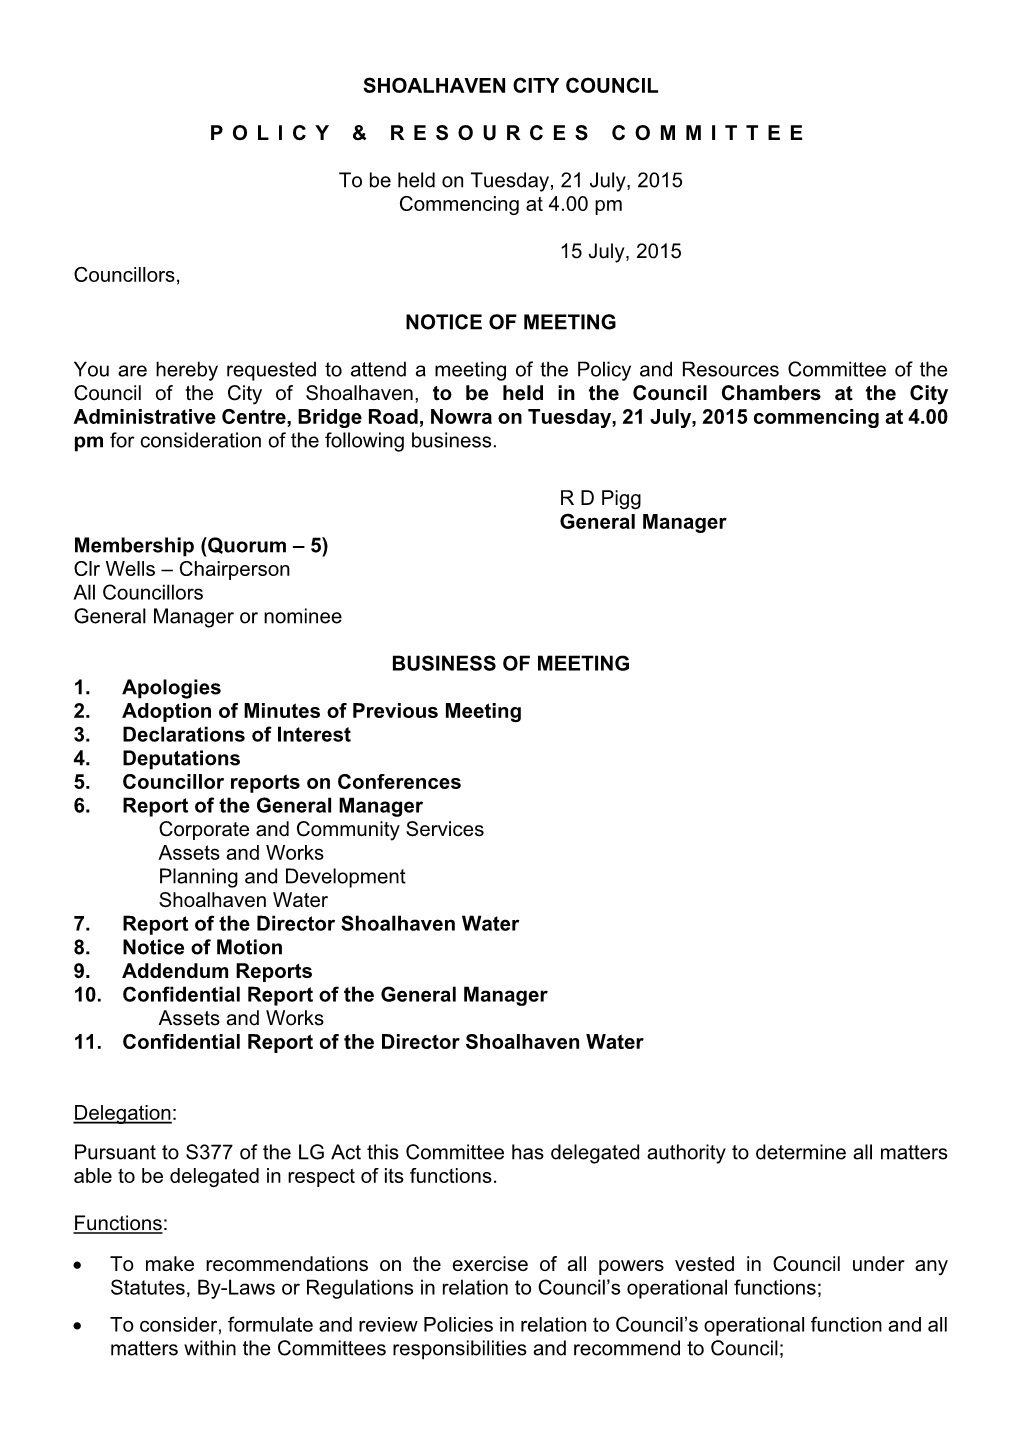 Agenda Policy and Resources Committee 21 July 2015